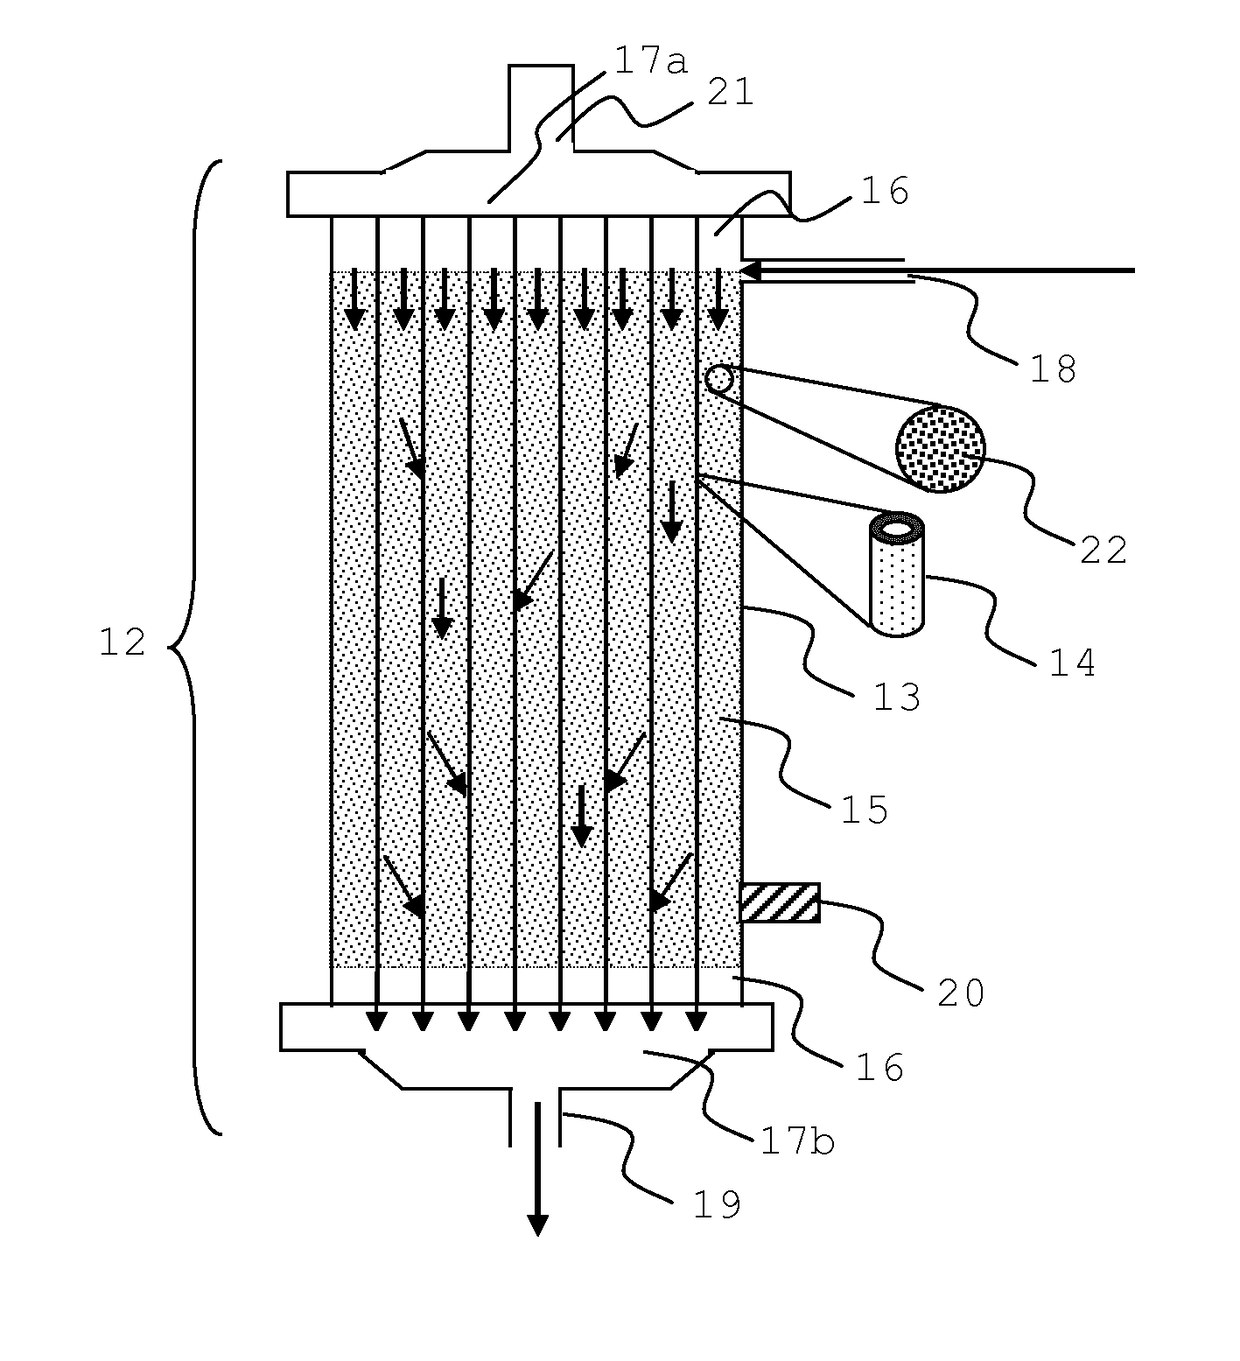 Integrated device for liver support system